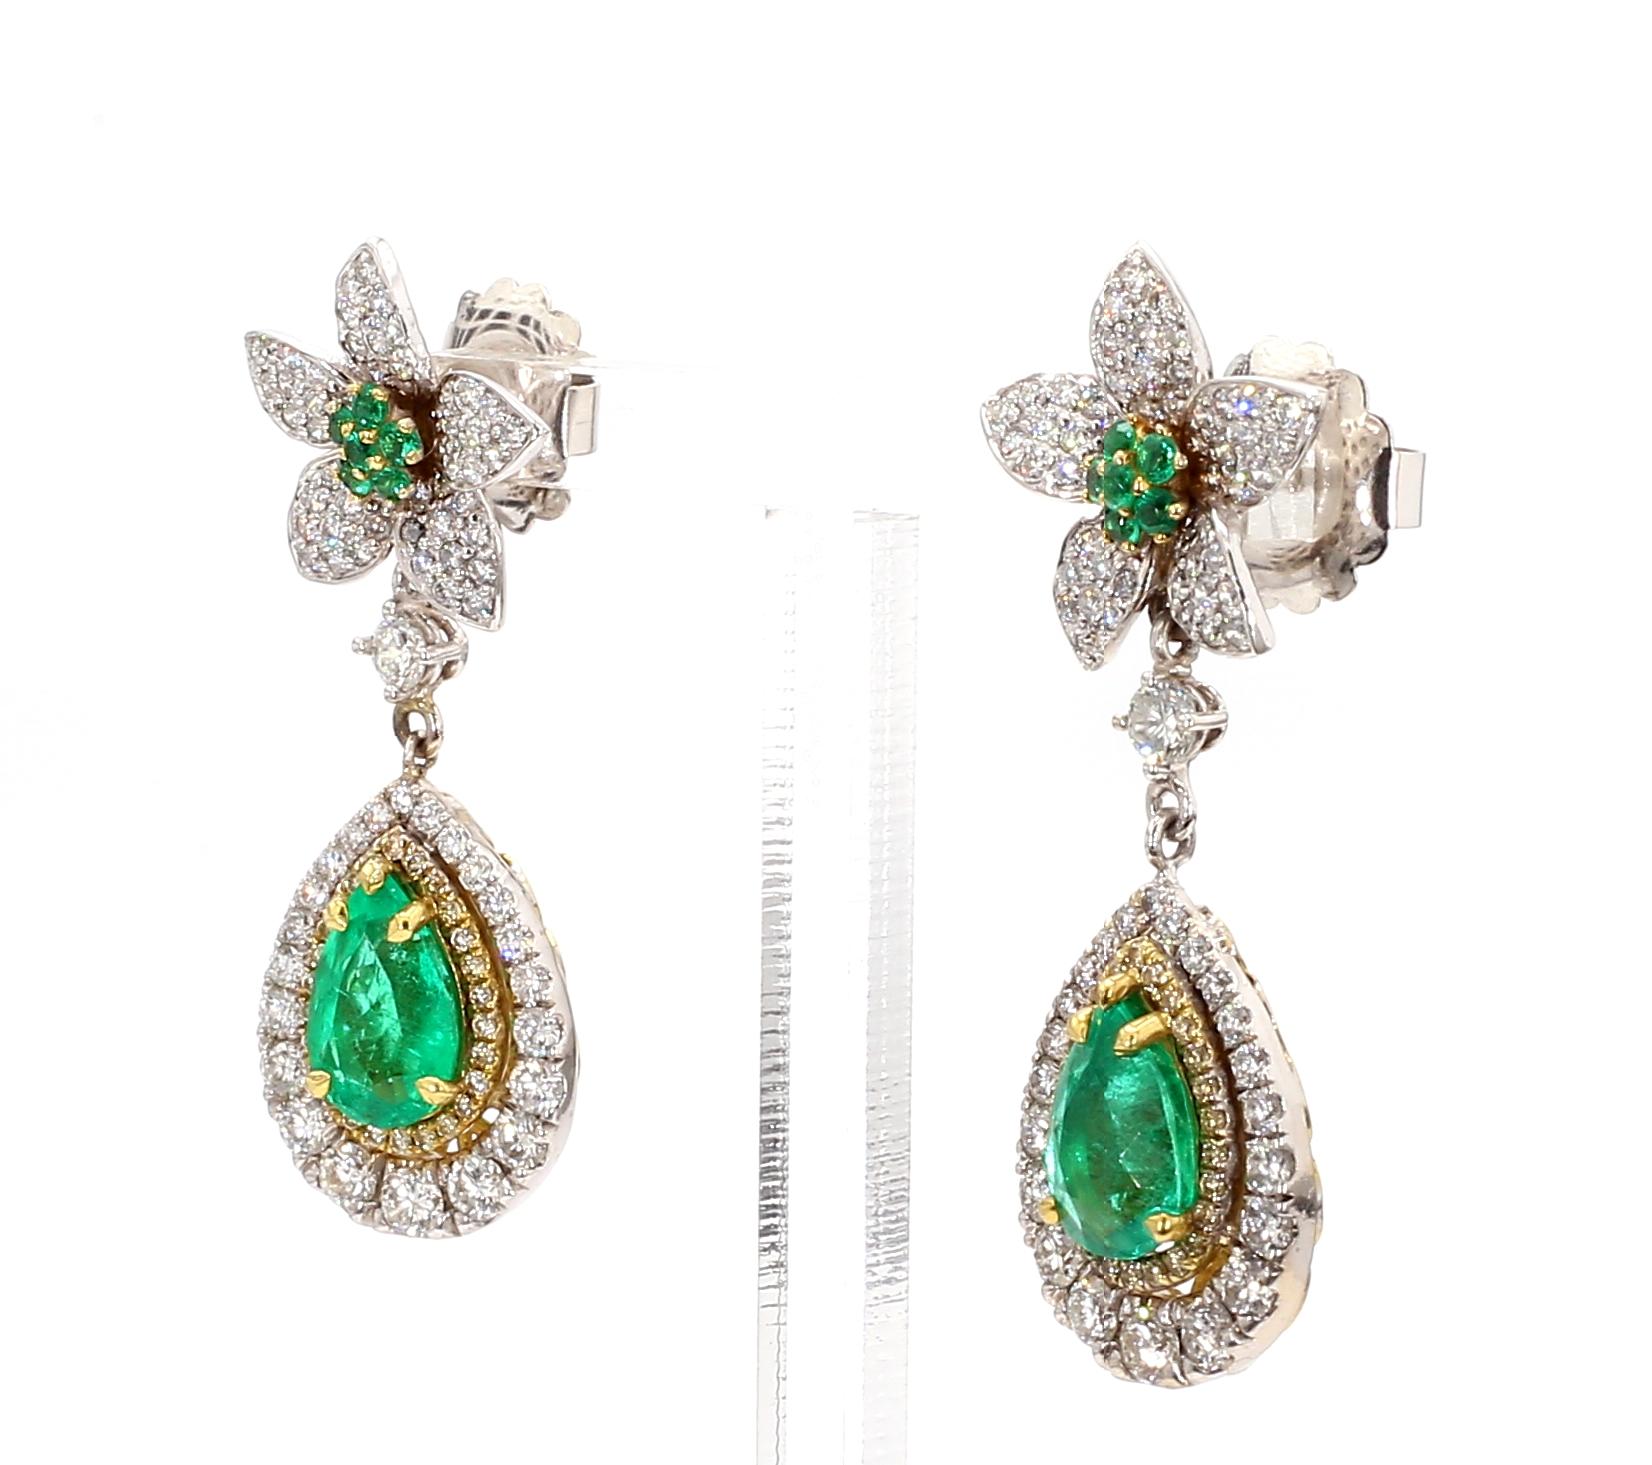 One-of-a-Kind Colombian Emerald Earrings 

3.26 Ct Total - Emerald Weight
2.43 Ct Total - Diamond Weight

GIA Certified

18K Gold Two-Tone Gold